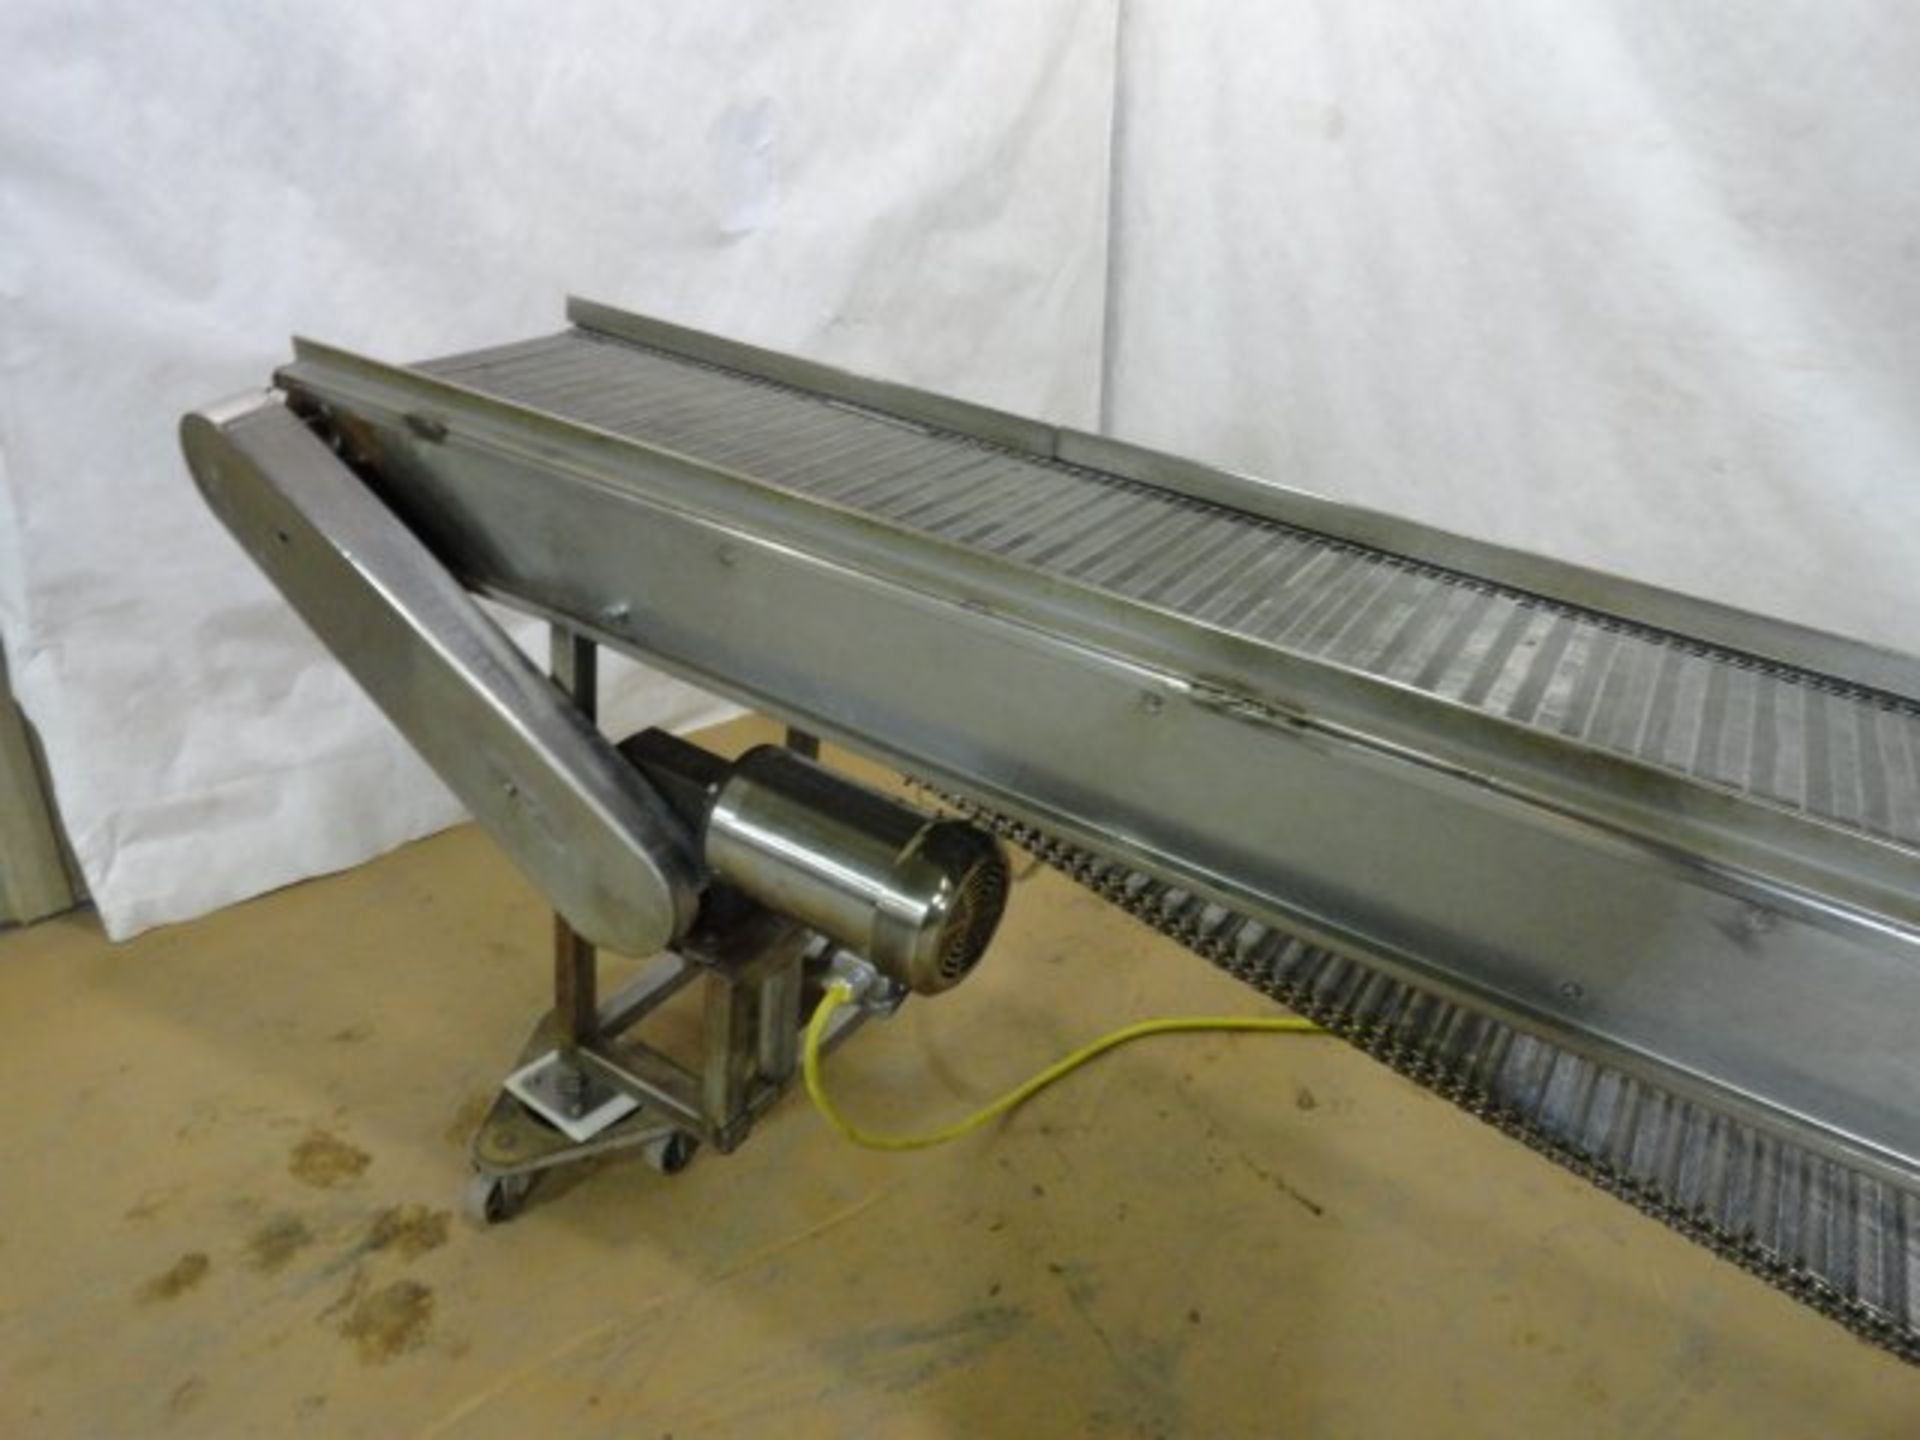 Stainless Steel Wire Mesh Belt Conveyor, 14"W x 23' L. - Image 2 of 5